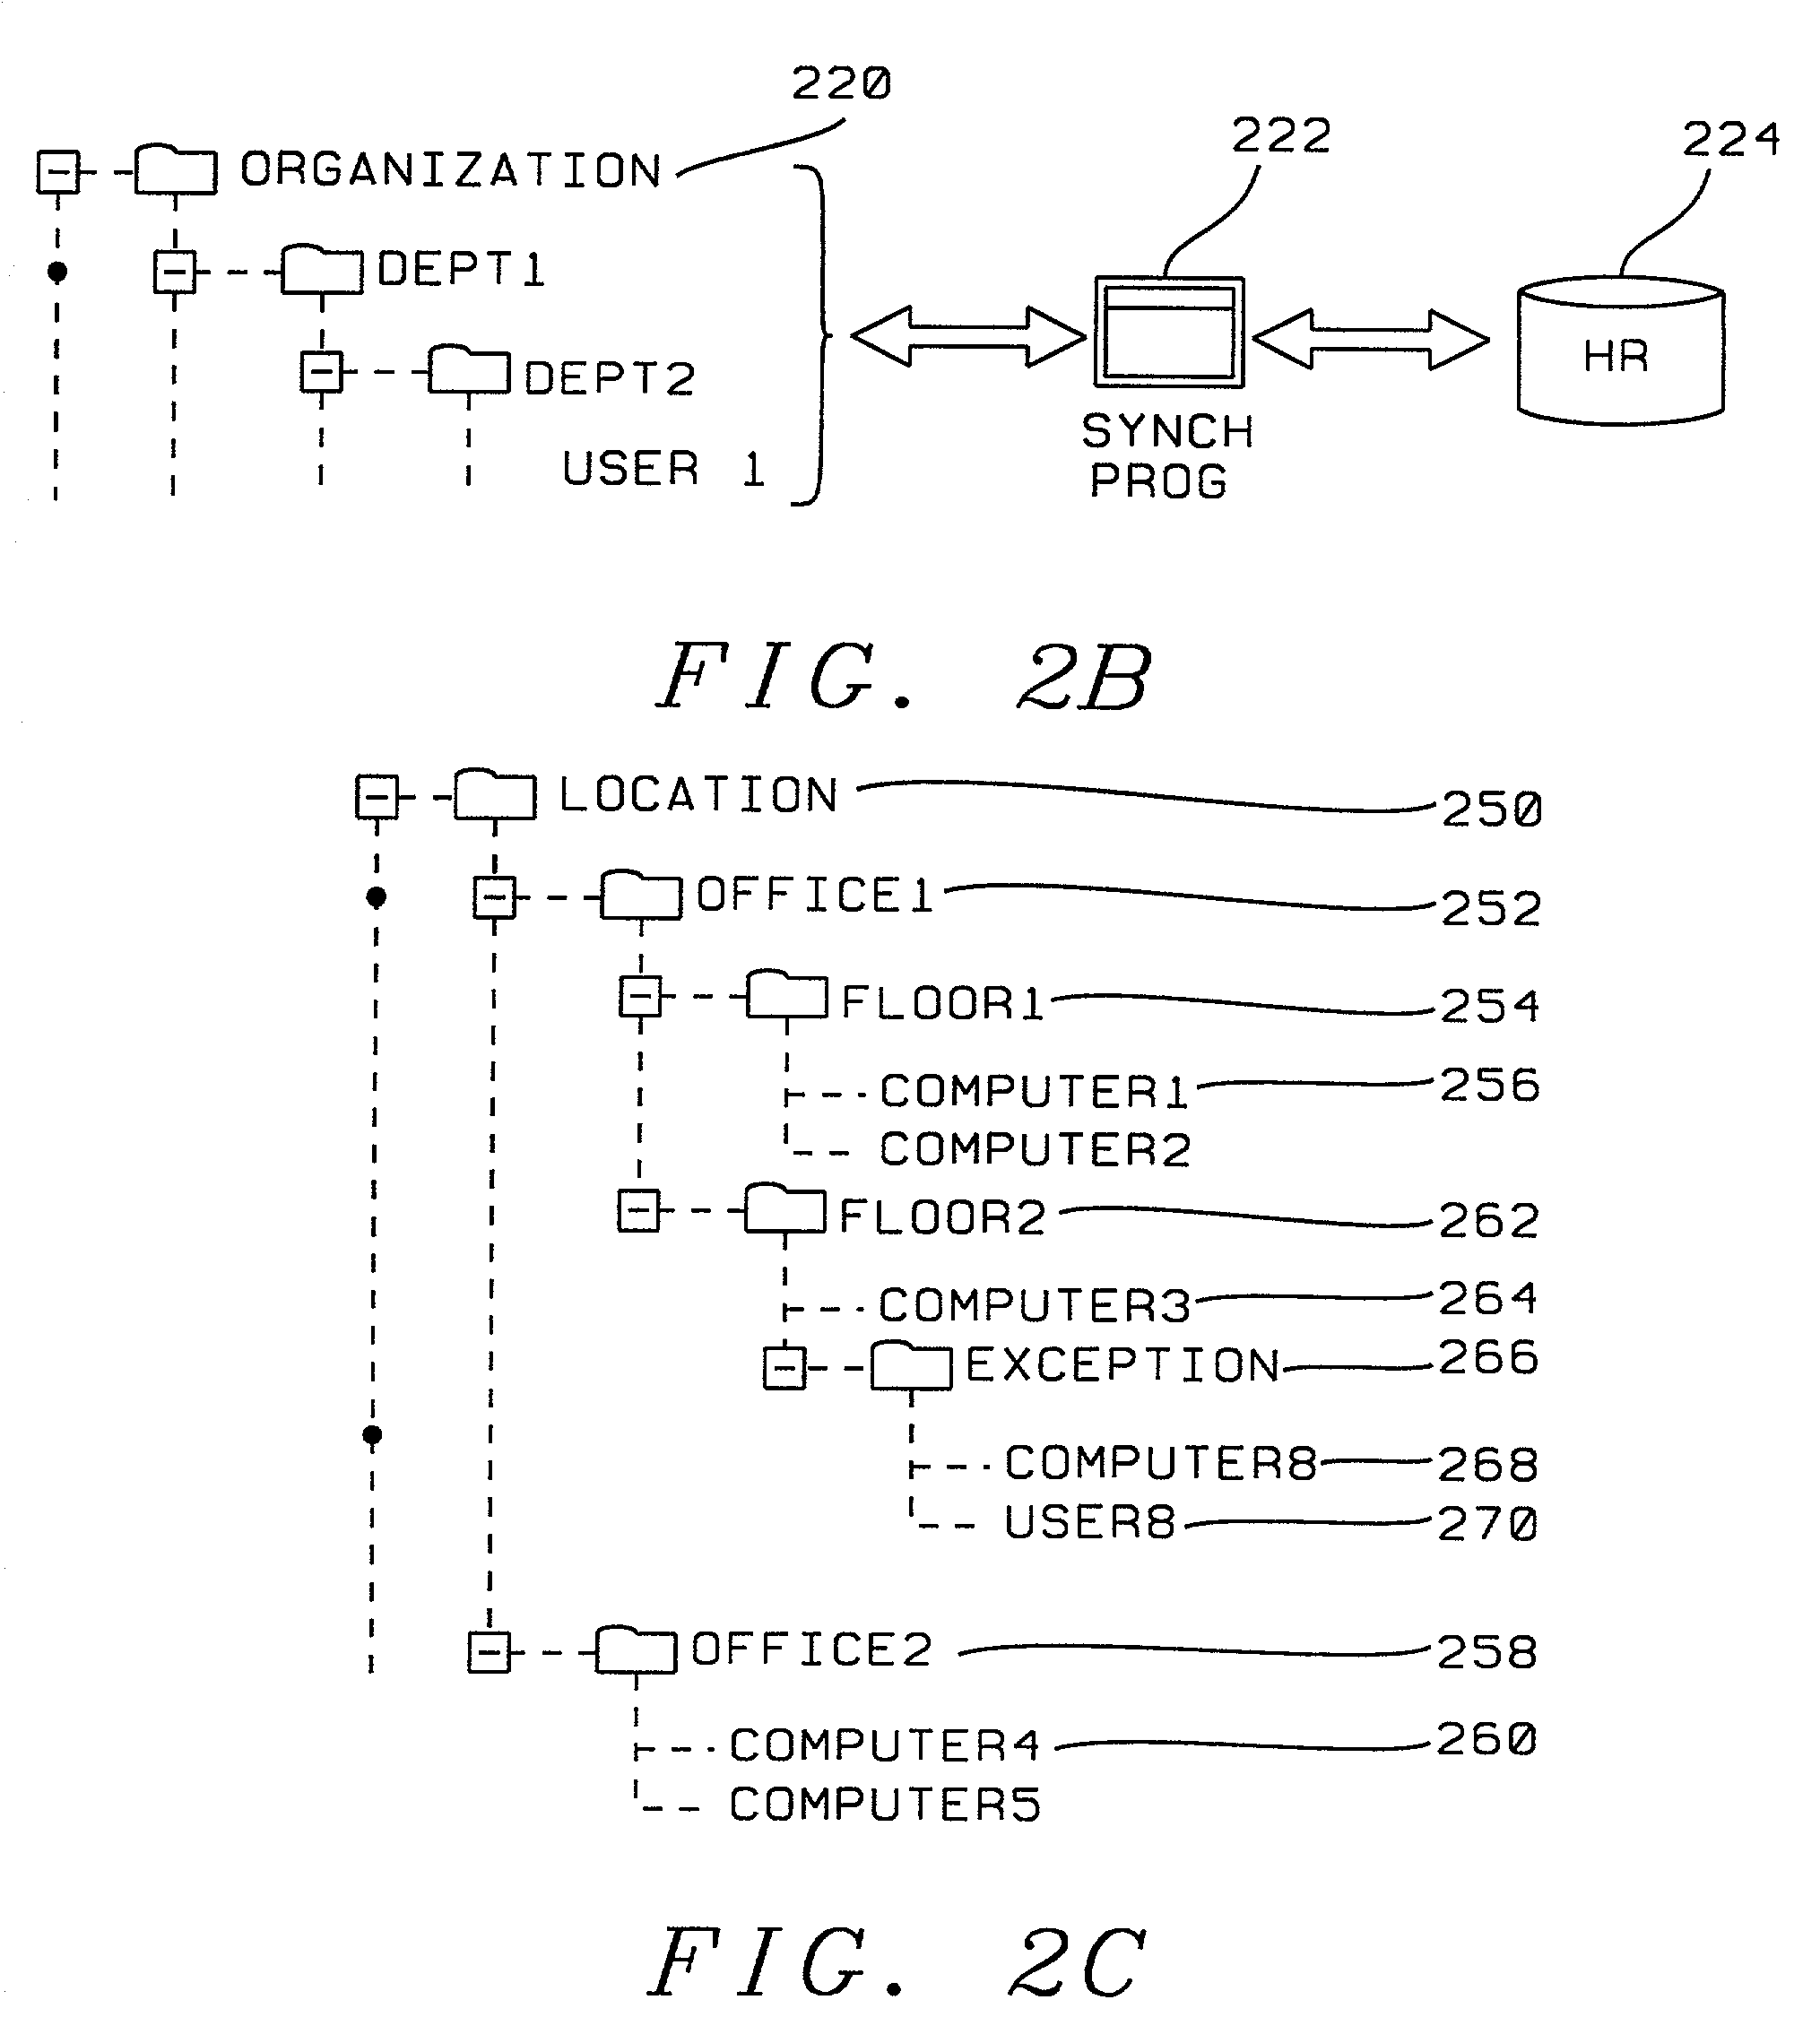 Methods of managing user and computer objects in directory service